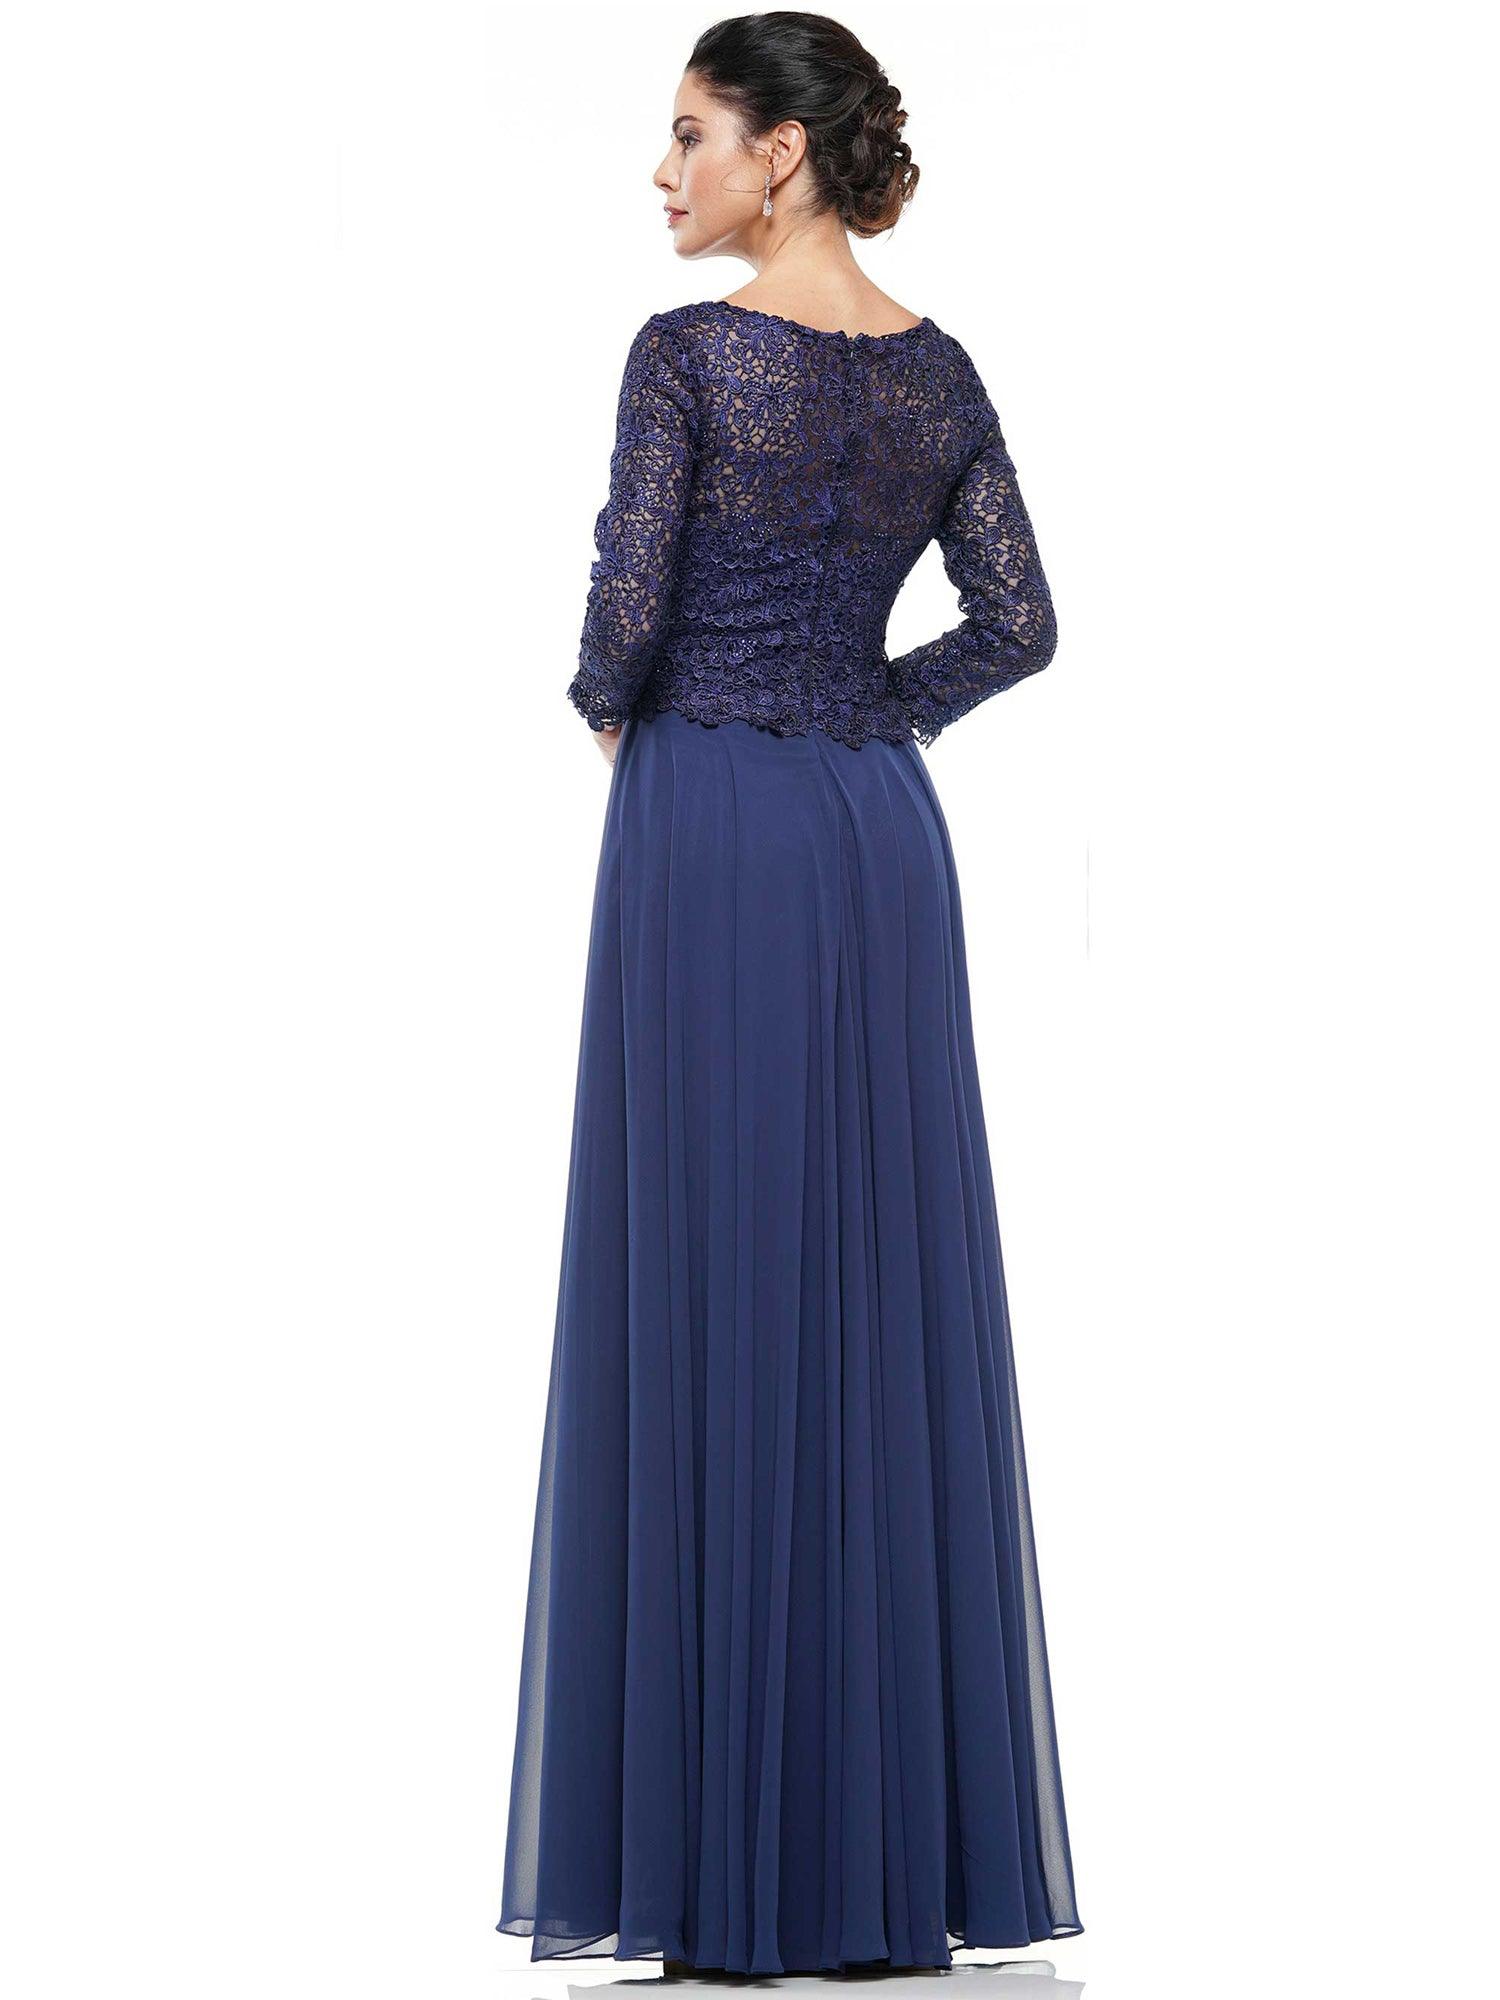 Marsoni Long Chiffon Mother of the Bride Gown 223 - The Dress Outlet